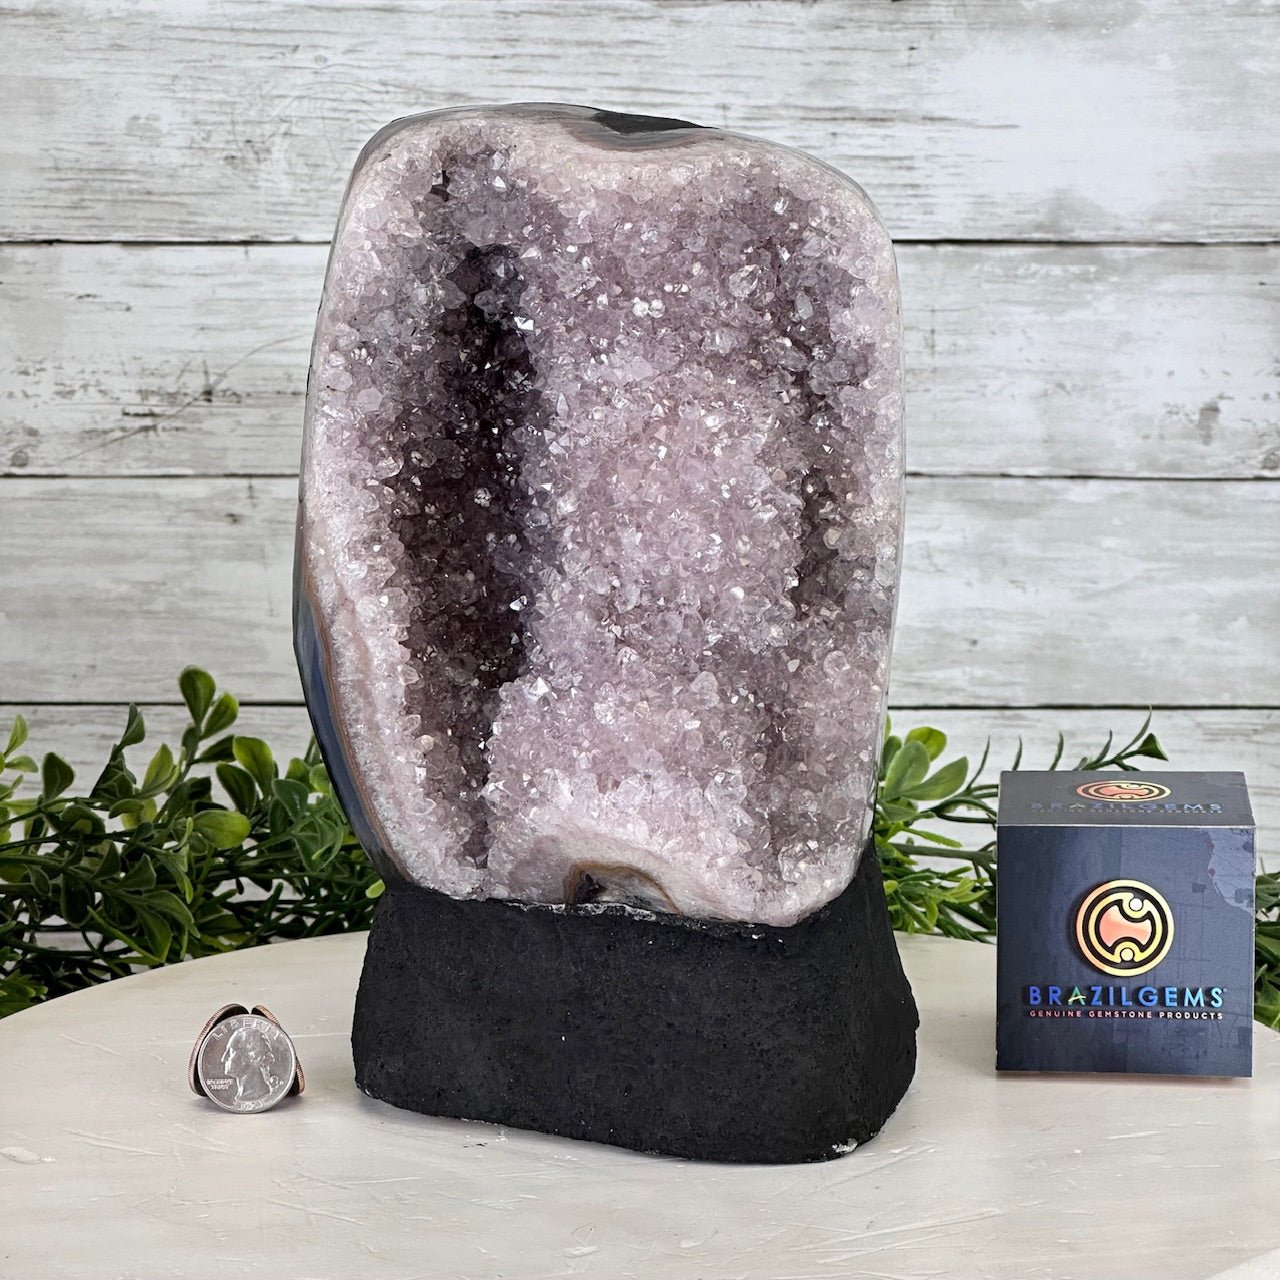 Standard Quality Amethyst Crystal on Cement Base, 11.3 lbs and 9.5" Tall #5614-0074 - Brazil GemsBrazil GemsStandard Quality Amethyst Crystal on Cement Base, 11.3 lbs and 9.5" Tall #5614-0074Clusters on Cement Bases5614-0074